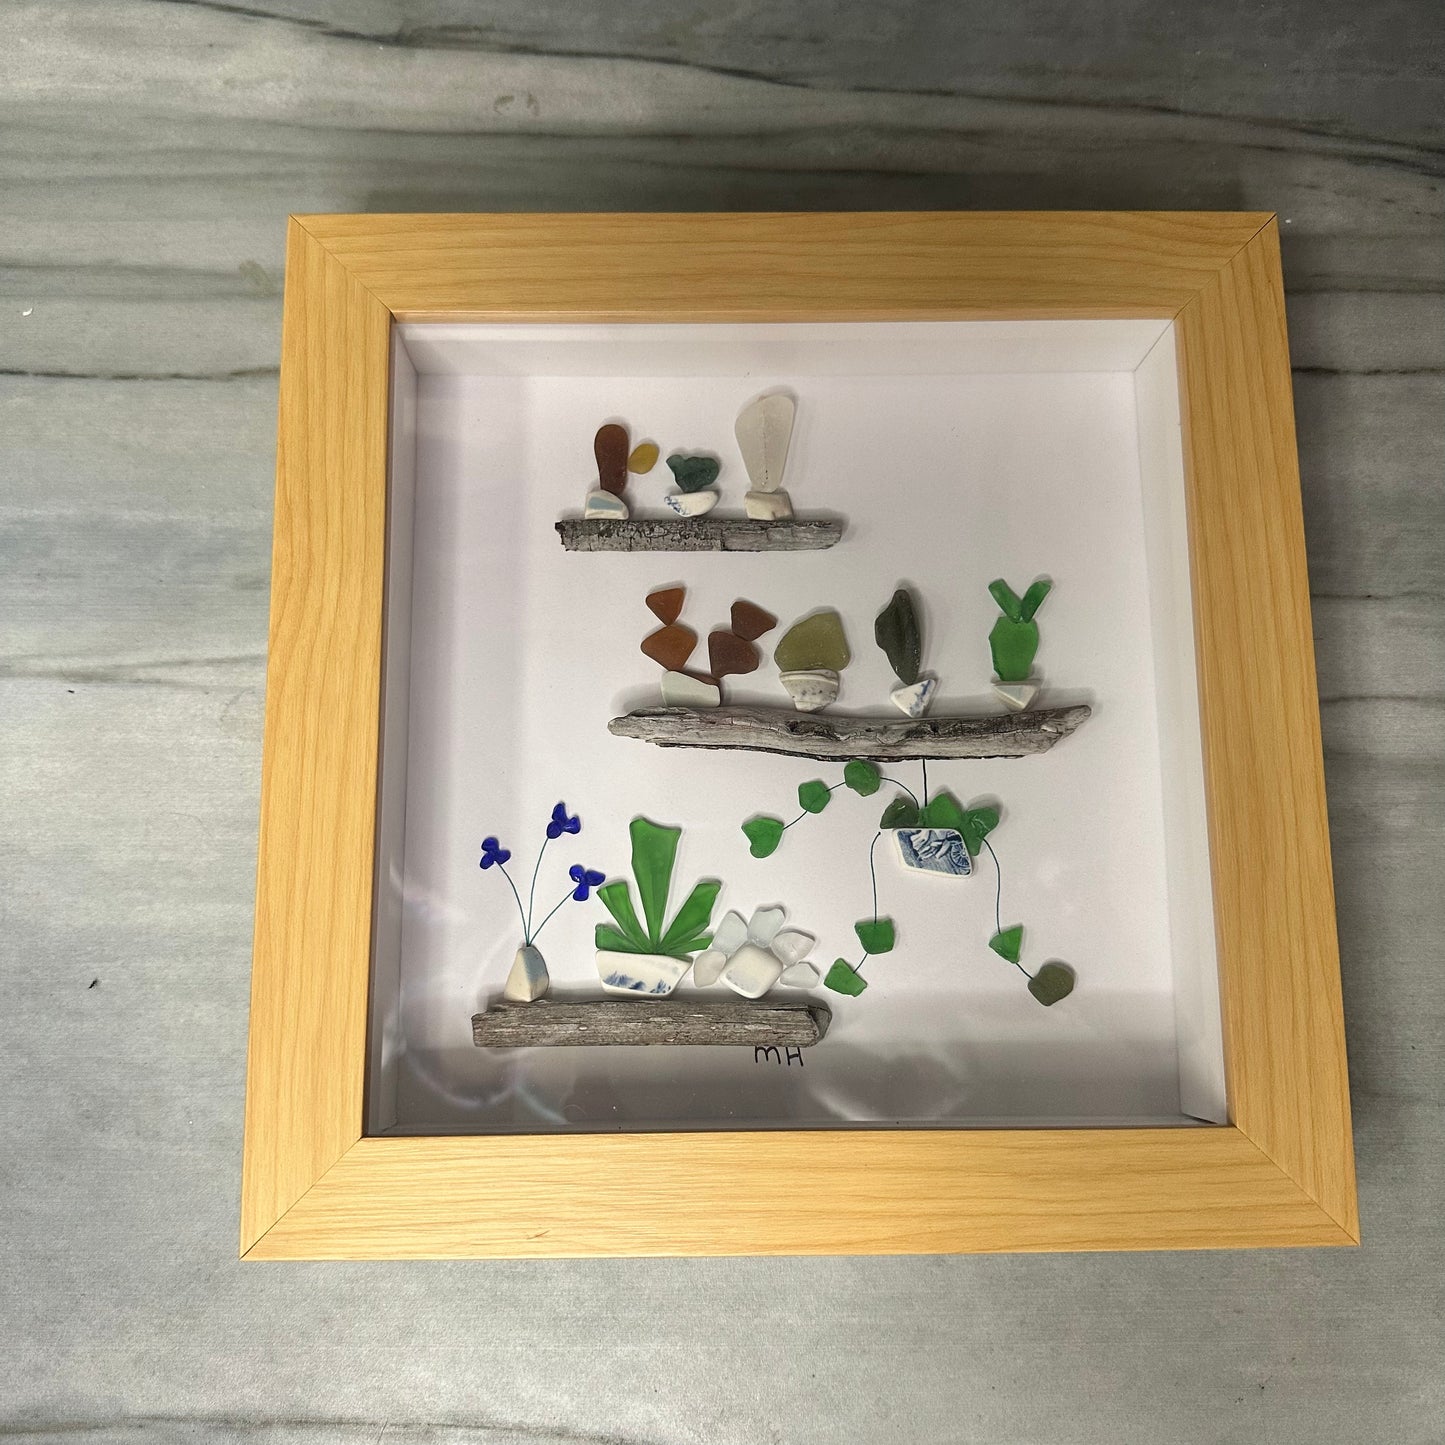 Plant Shelves & Hanging Plant Sea Glass Artwork - Crazy Plant Lady Gifts